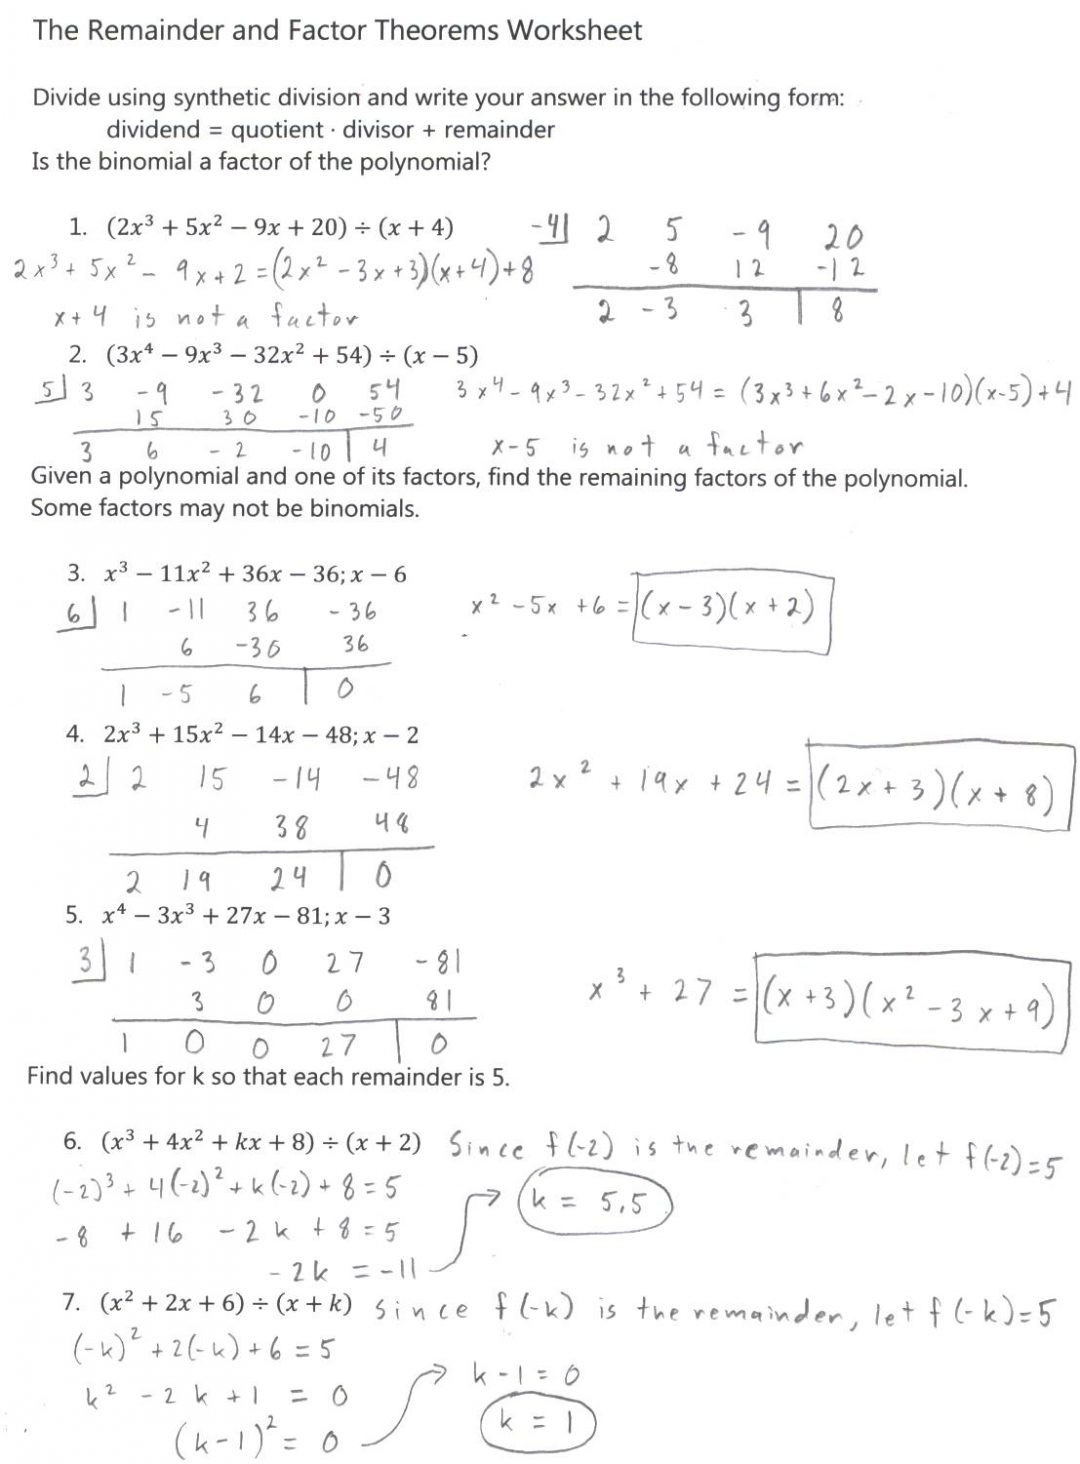 synthetic division worksheet with answers pdf db excelcom